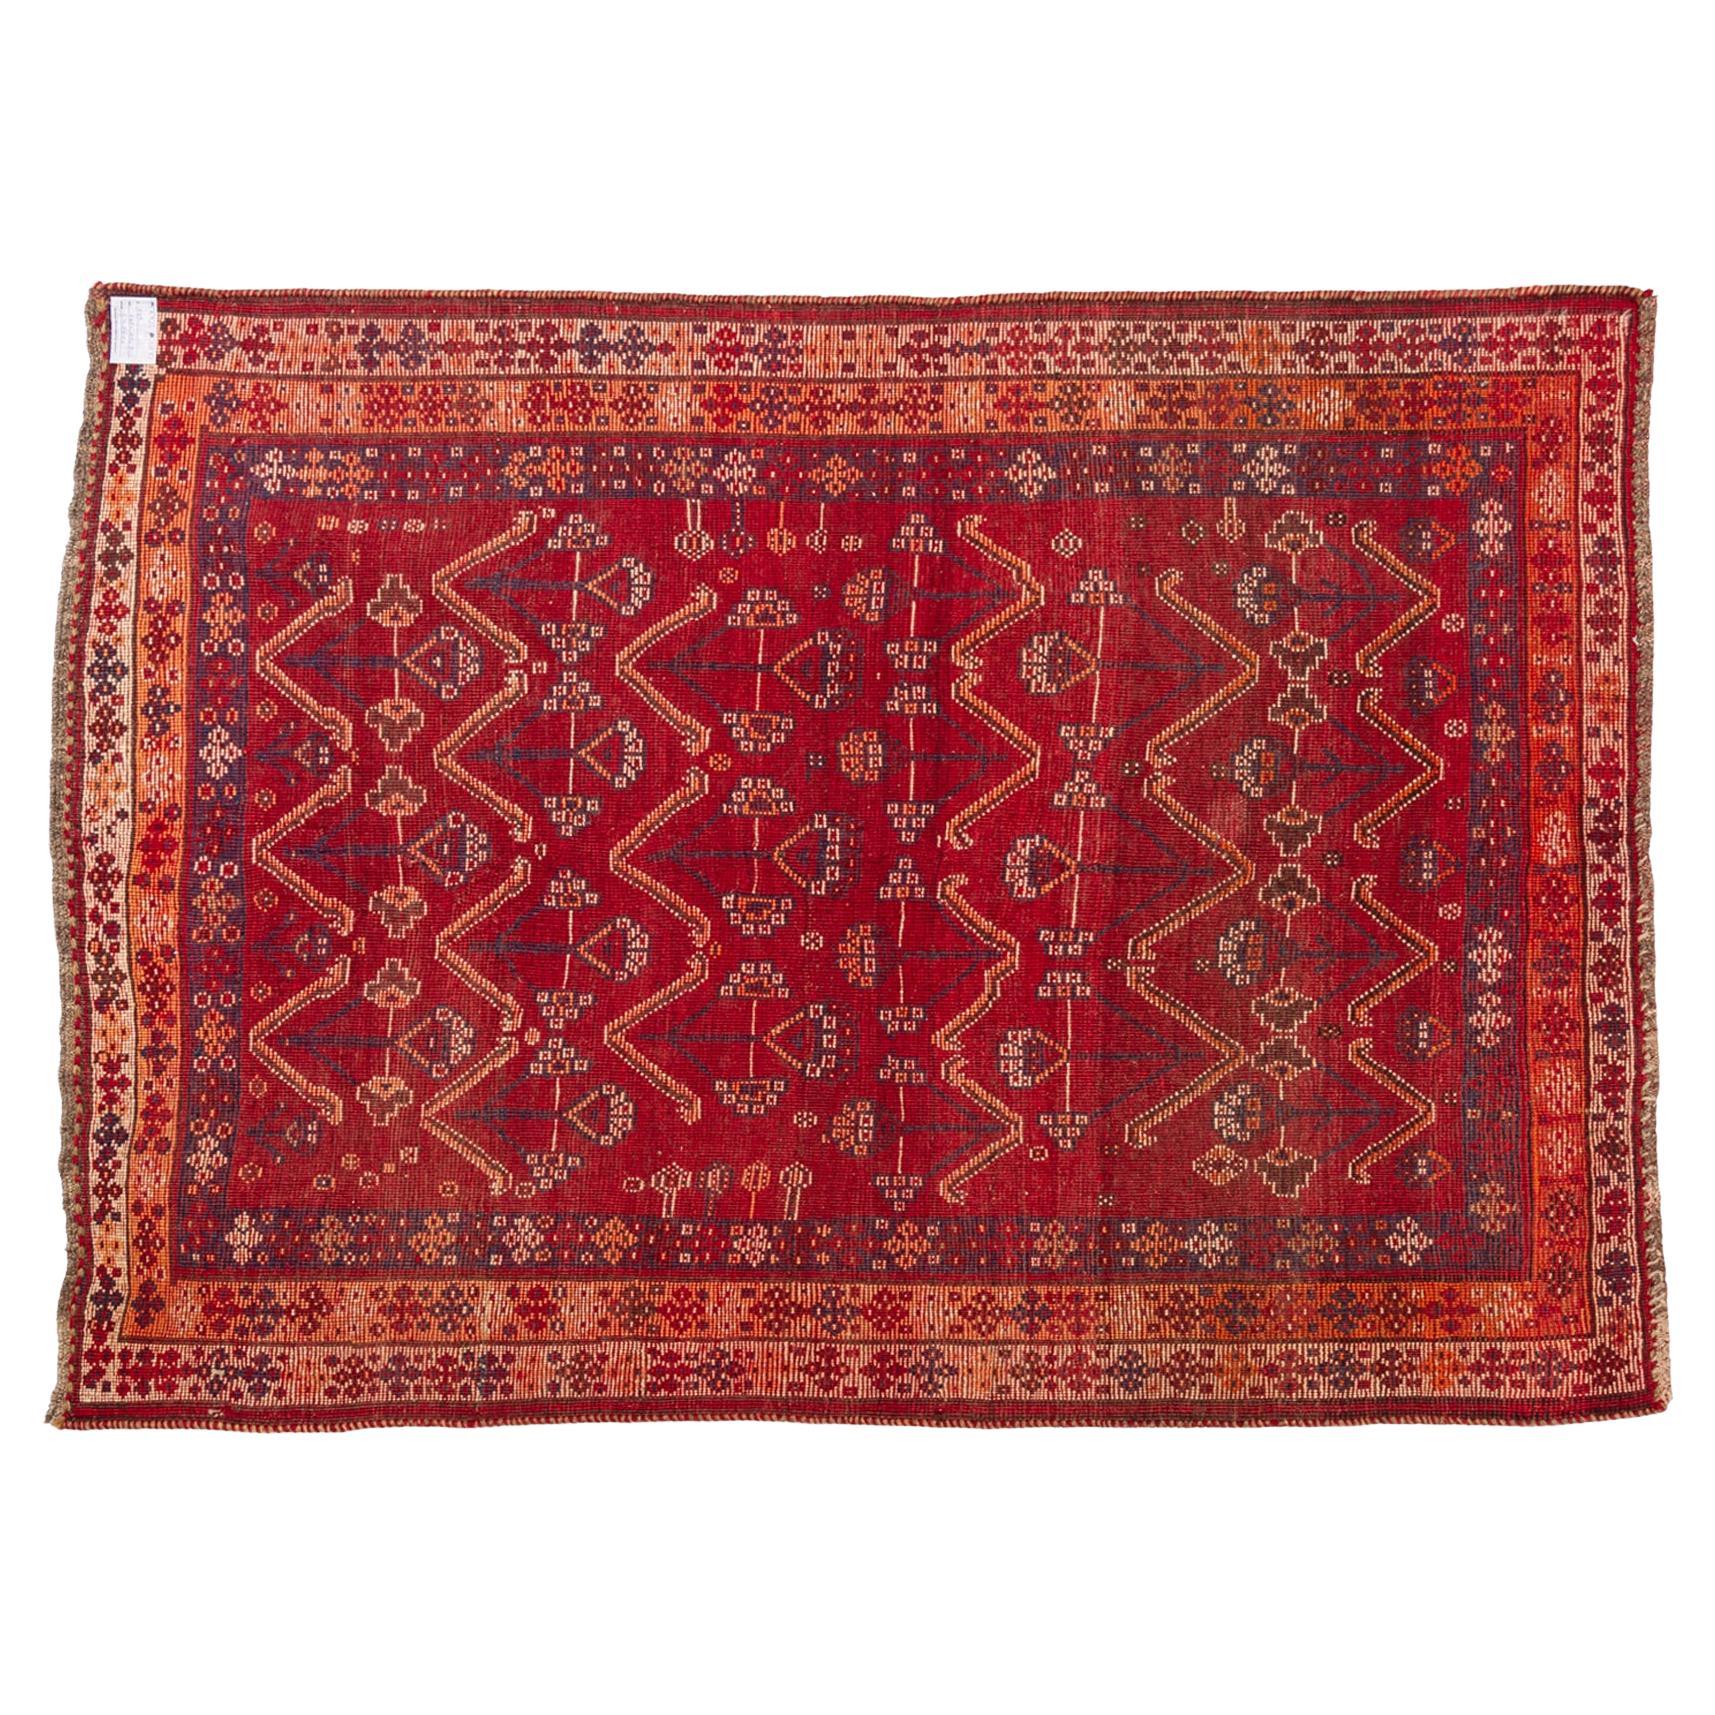 nr. 953 - A carpet with a naive taste because it was made by nomads.  wool spun by hand and dyed with natural colors, available on the ground. The design is simple and pleasant with white flowers throughout the field.
Soft but sturdy. 